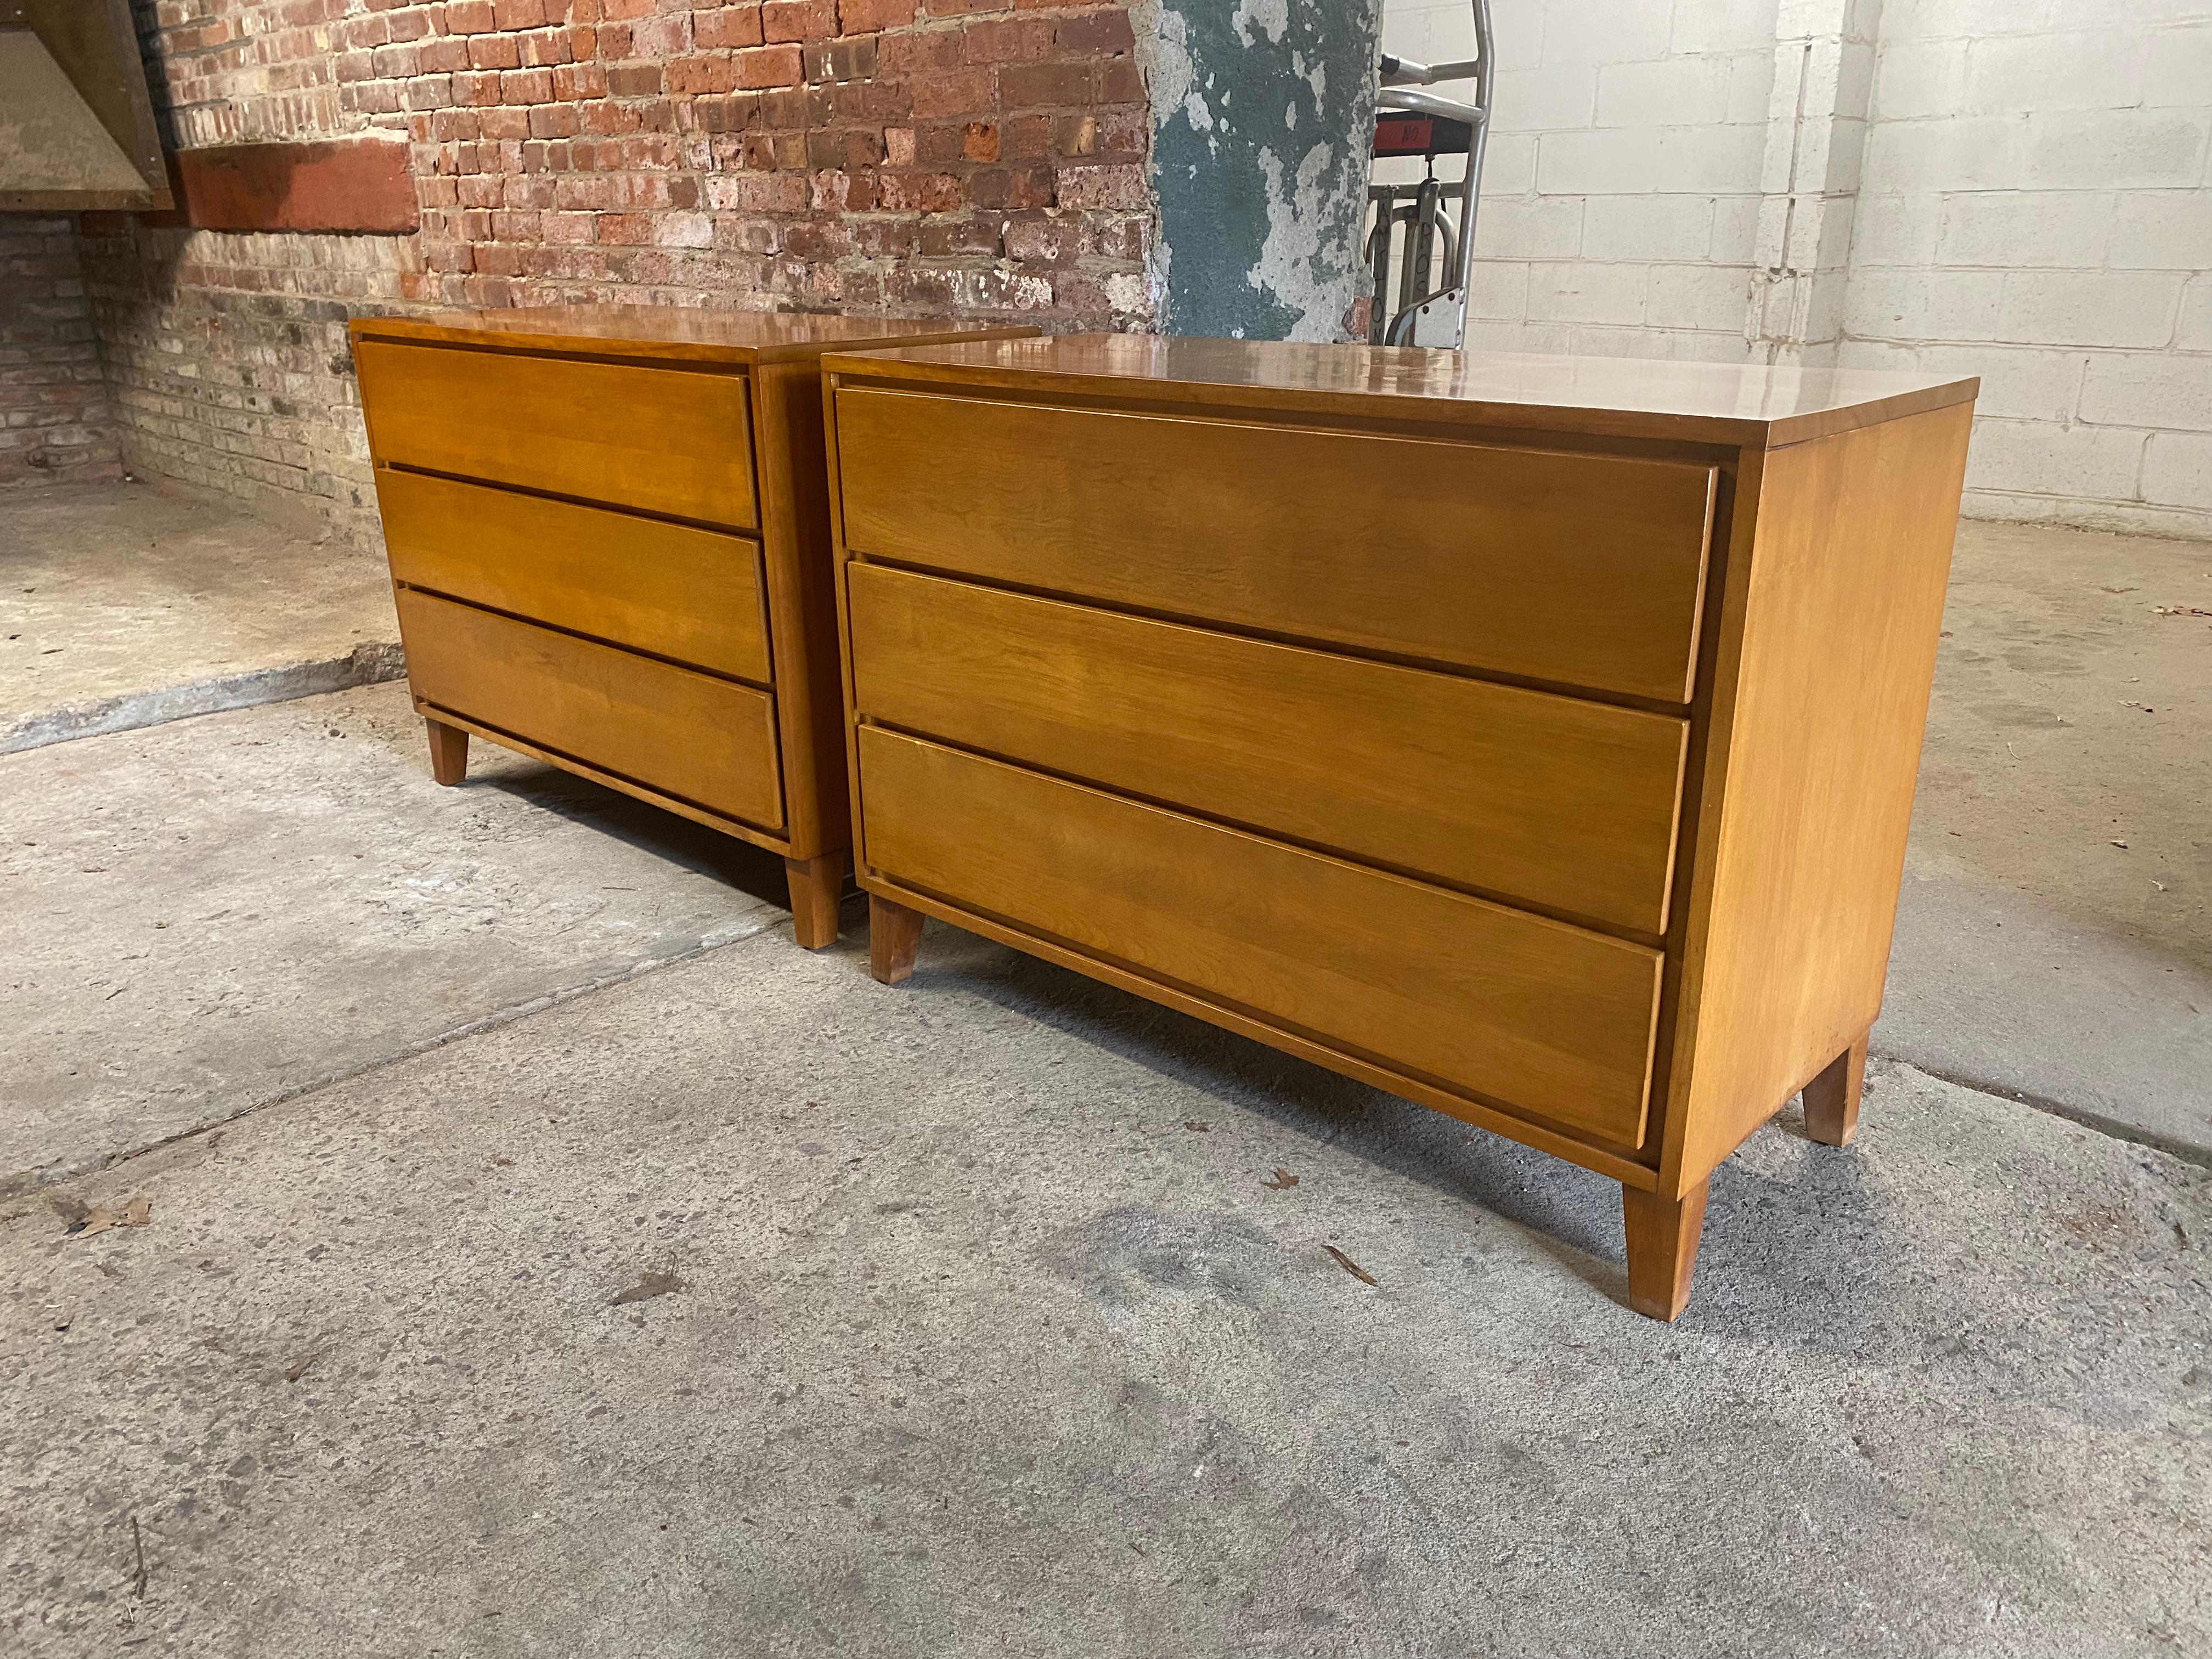 A very clean pair of solid maple three drawer dressers designed by Leslie Diamond for Conant Ball American Modern line. Circa 1950-54. The block front dressers feature solid maple construction, three deep drawers with hidden channel handle and